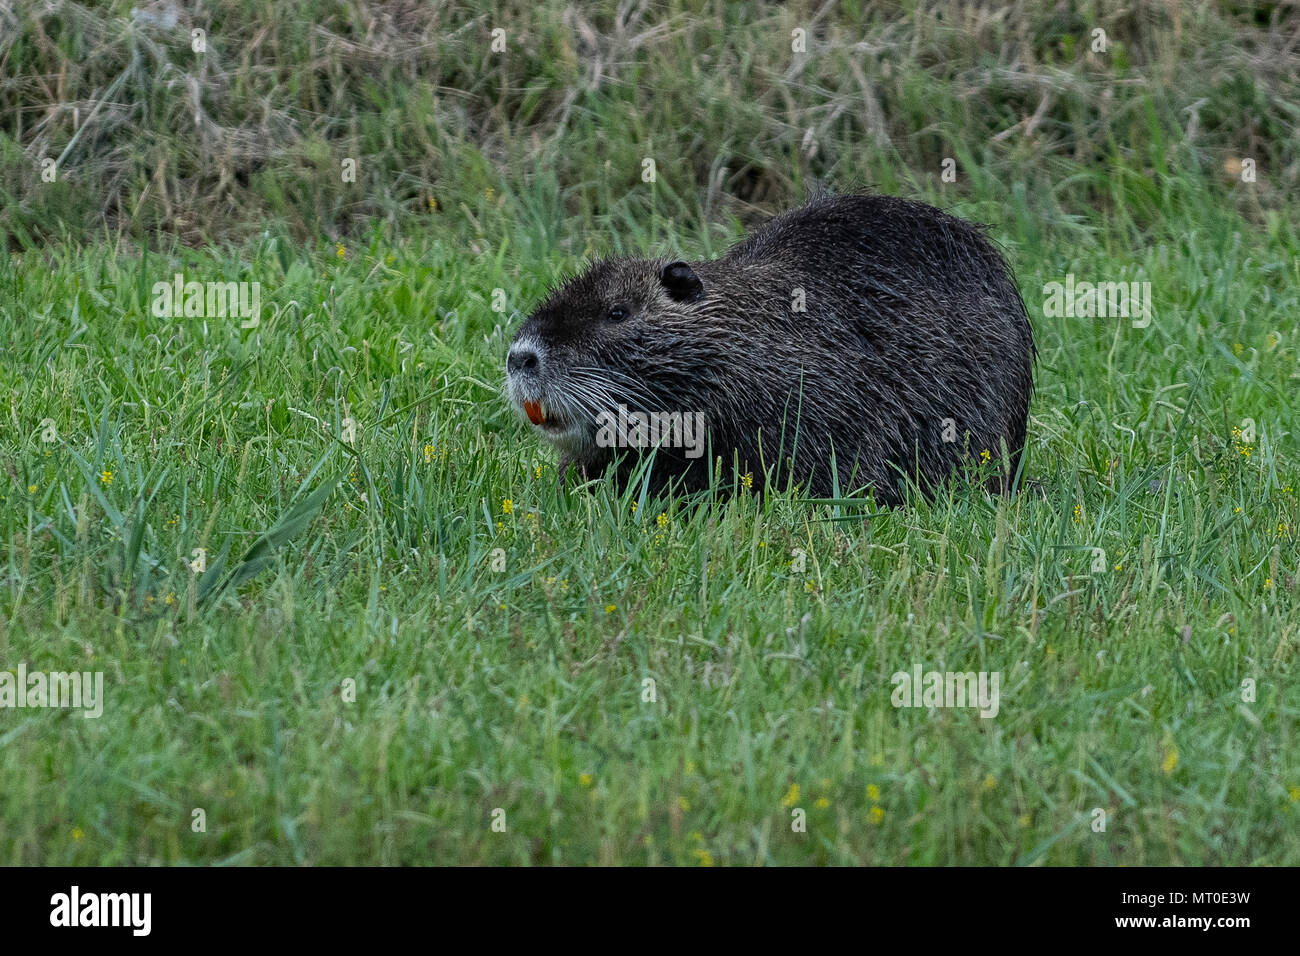 A coypu, also known as the nutria, is a large, herbivorous, semiaquatic rodent. Pictured in an urban canal near the coast of Slovenia. Stock Photo